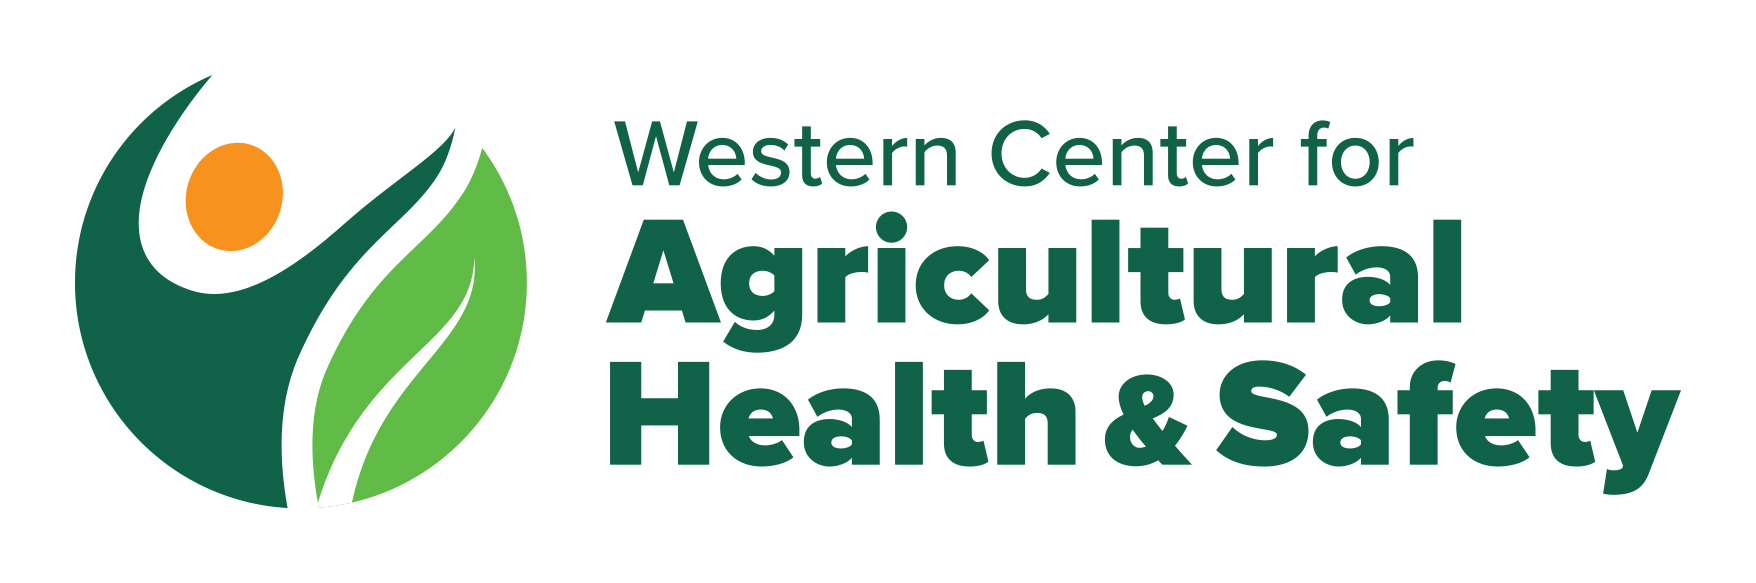  Western Center for Agricultural Health and Safety